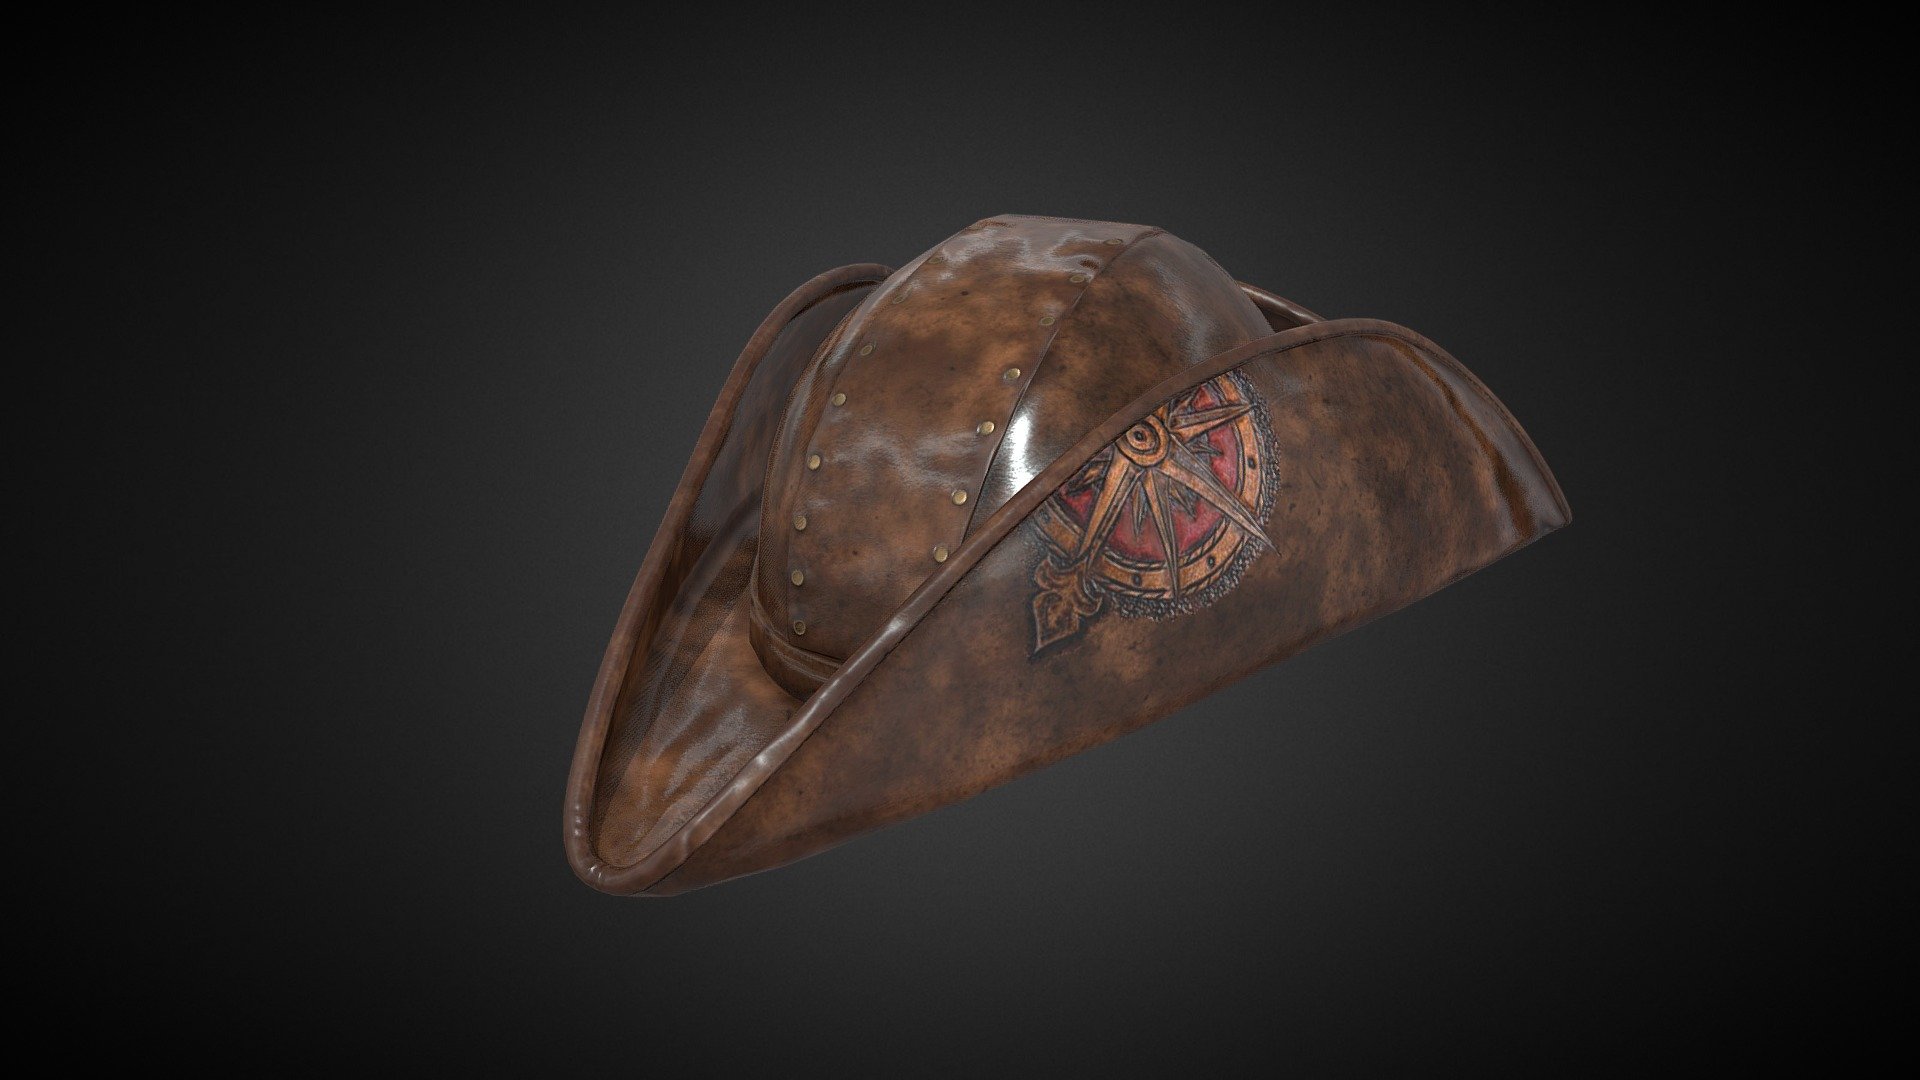 High Detailed Photorealistic Pirate Hat made with blender and rendered by 3dsmax V-ray .
This model has a clean UV and geometry based on loops. Made with blender for cycles , v-ray and corona renderer.
It's low poly Ready to use in games and all 3d projects .
This hat also includes three Smart Material of Leather .
(Ready to render exactly as you see above)

polys : 2893
verts : 3082


More Products :
Pirate Hat 1 ( Game Asset ) : https://sketchfab.com/3d-models/pirate-hat-1-game-asset-cb6aa7e3896c46e1a2a960bd6dce6985 - Pirate Hat 4 ( Game Asset ) - 3D model by bridge_studio 3d model